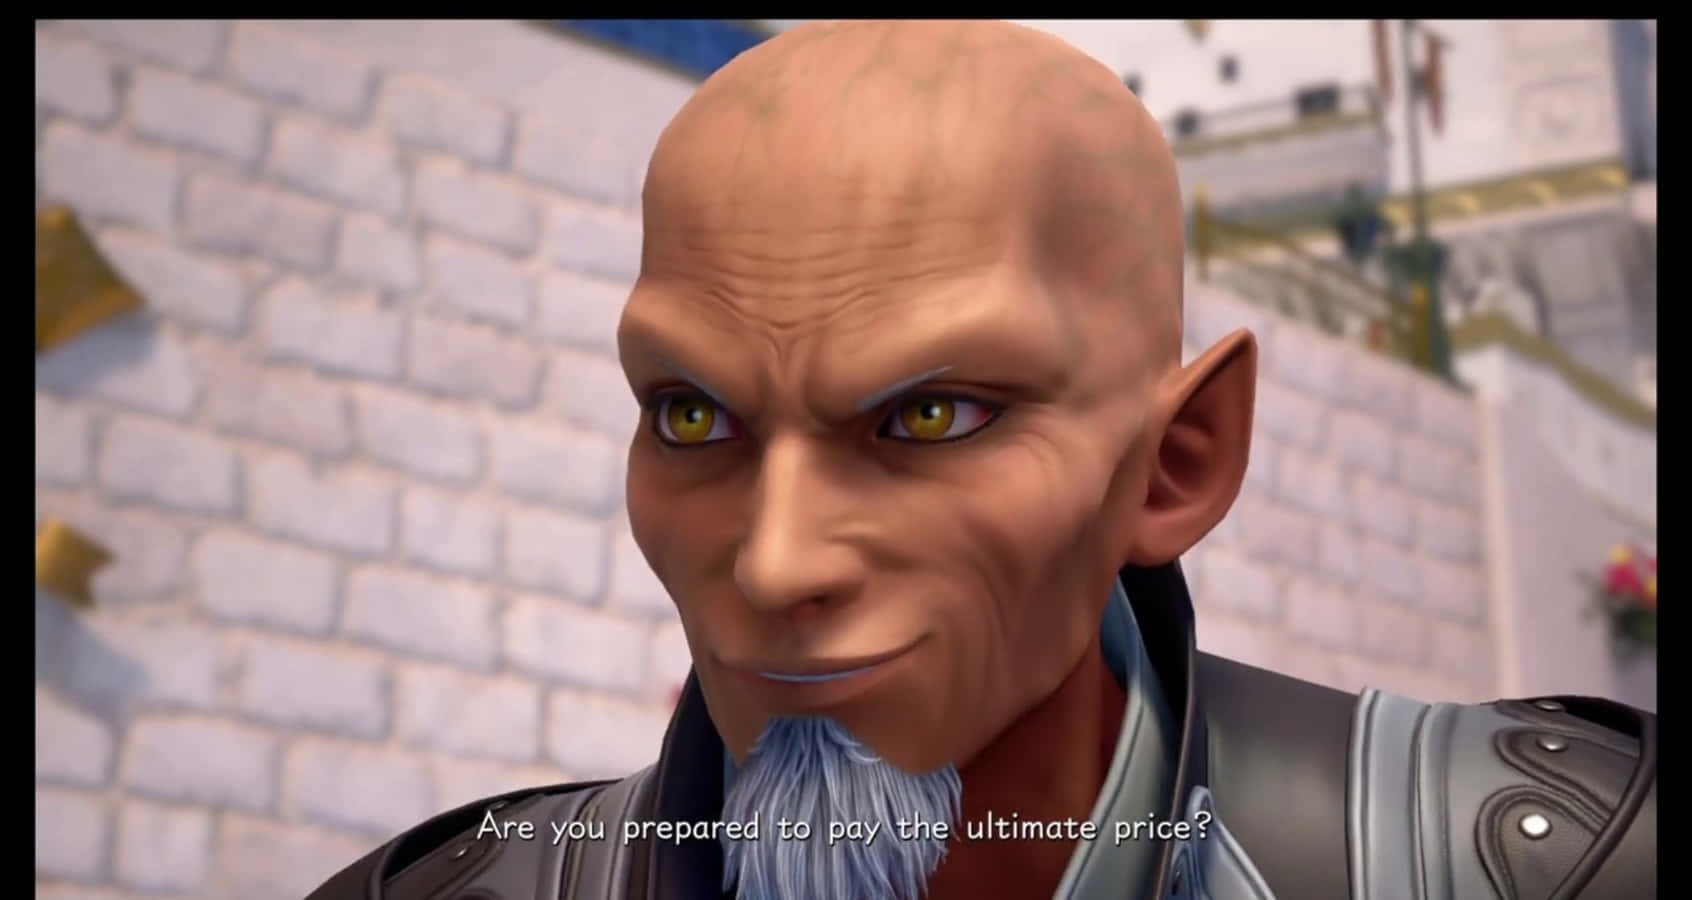 Xehanort, the main antagonist in Kingdom Hearts, stands ready for battles Wallpaper